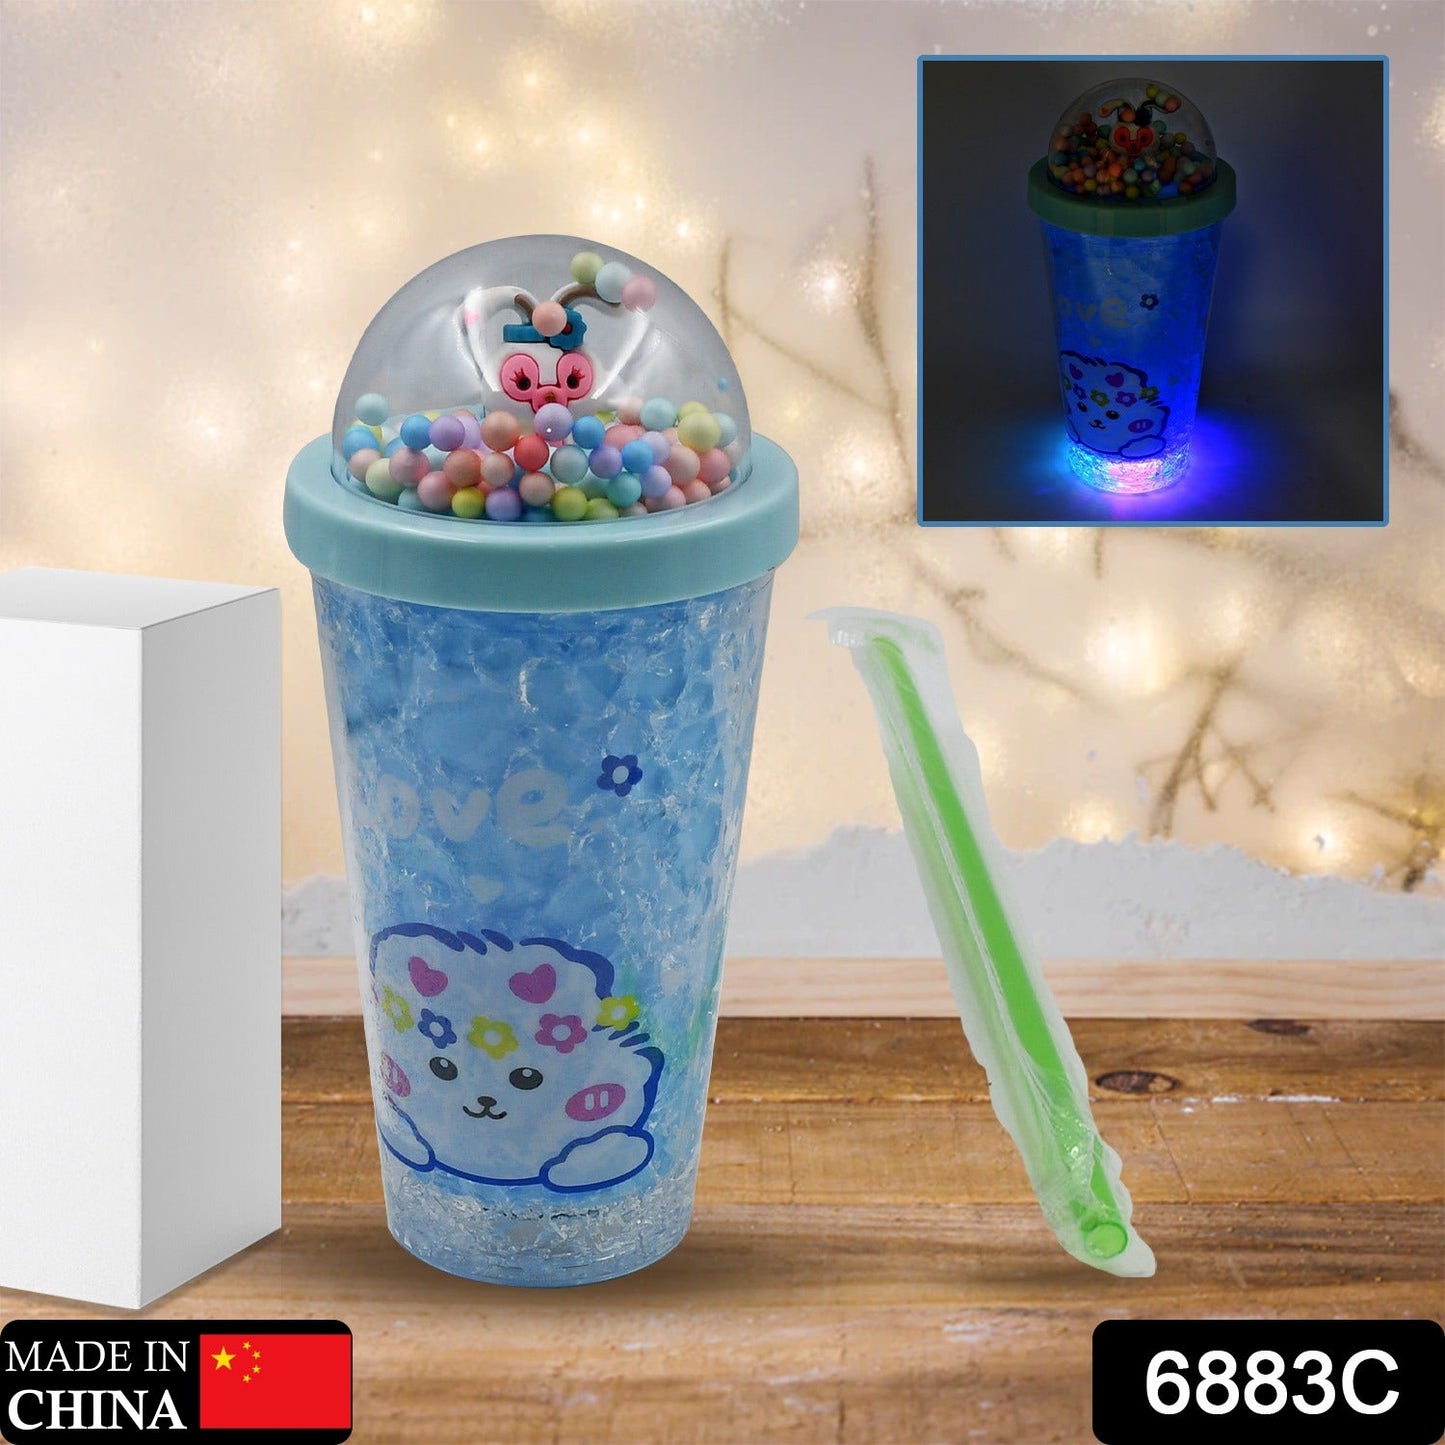 LED Light Unicorn Sipper Water Bottle Mason Jar Tumbler with Straw for Kids Glitter Sipper with Toy Drinking Cups for Boys and Girls School/Tuition/Gym/ Picnic, Kids and Adults, Birthday Return Gifts